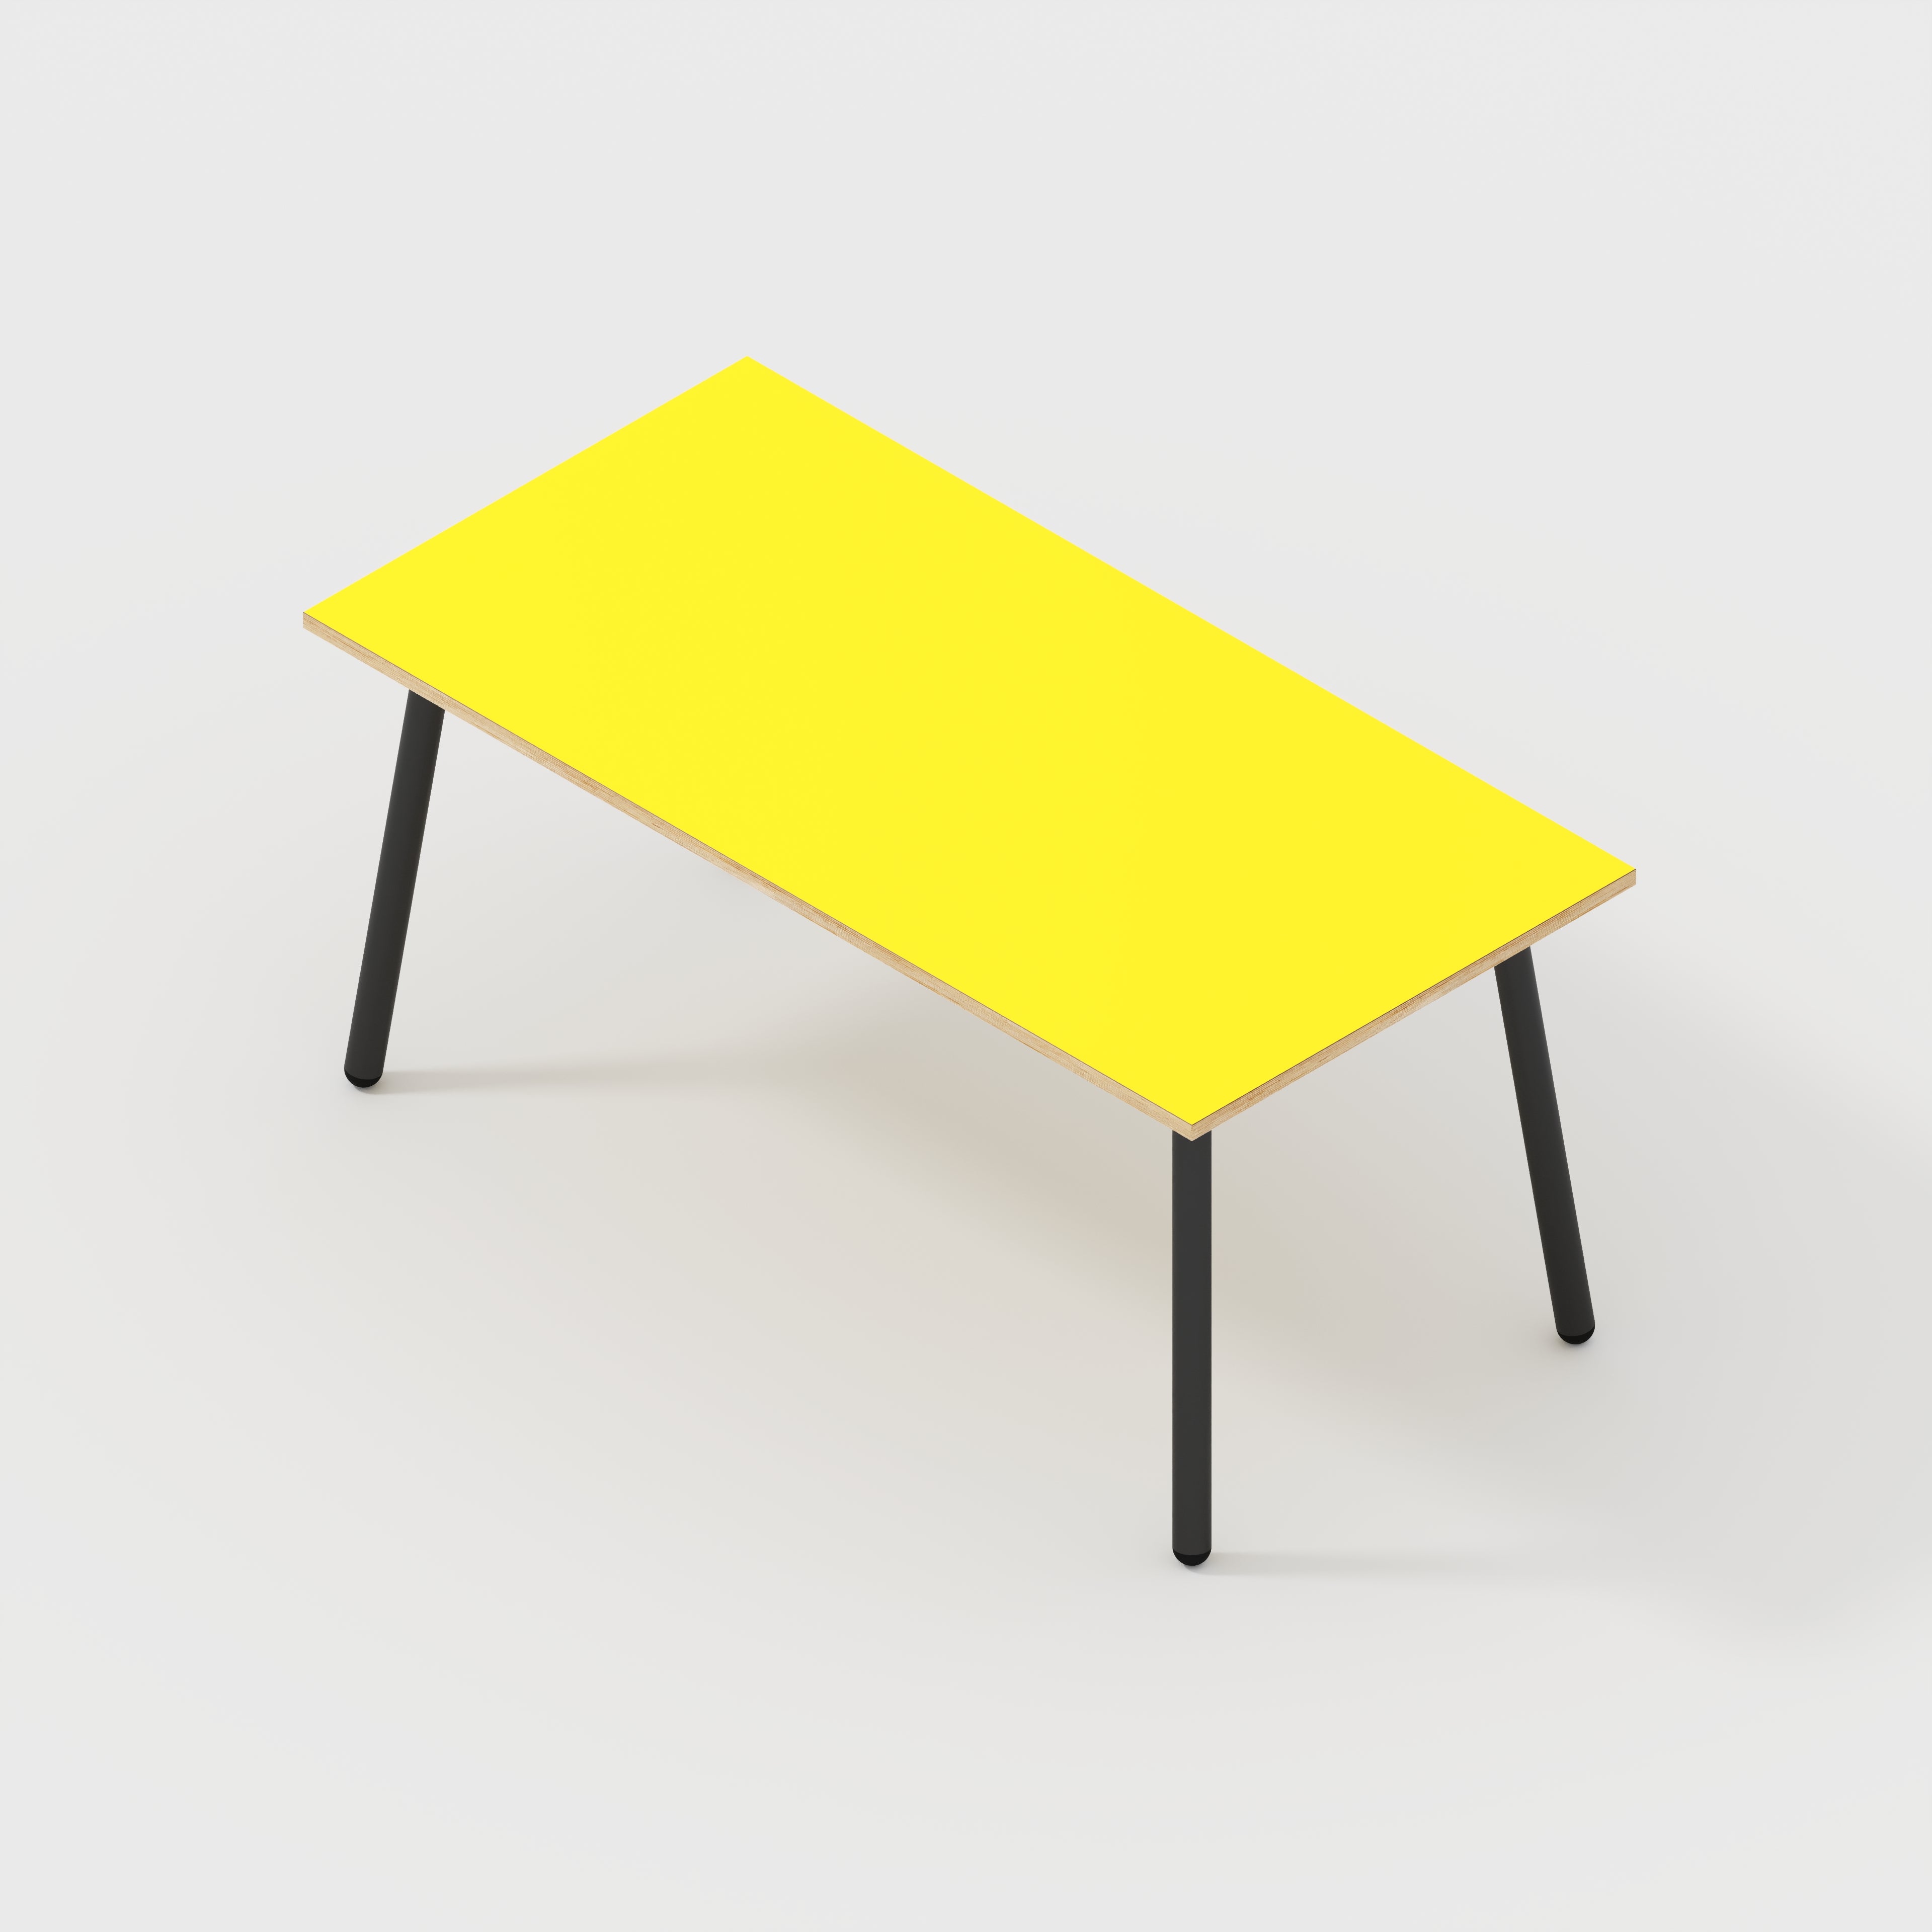 Table with Black Round Single Pin Legs - Formica Chrome Yellow - 1600(w) x 735(h)